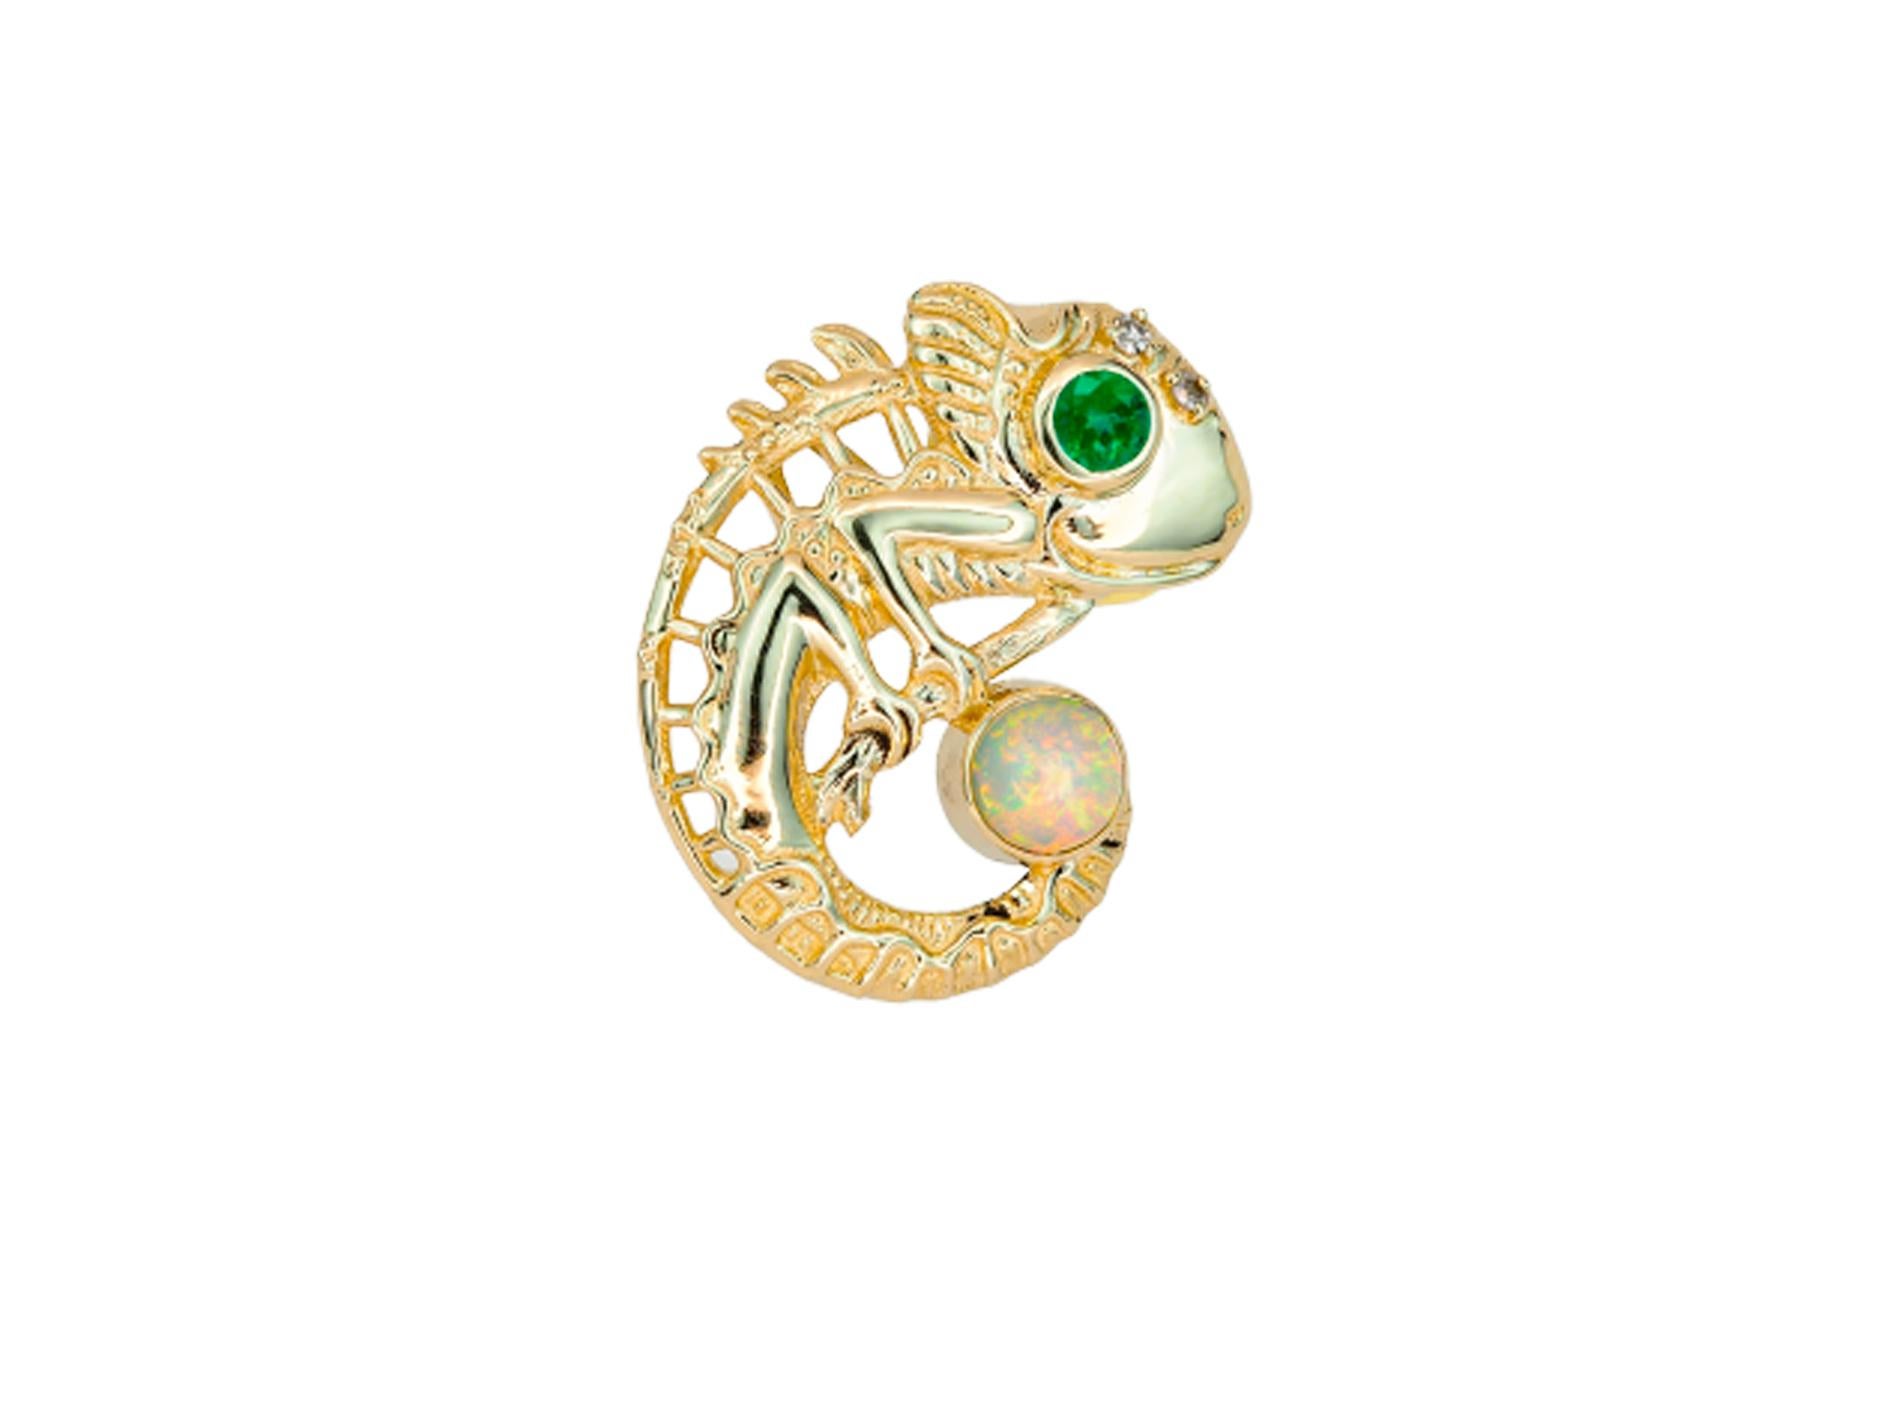 14k Gold Pendant with Opal, Emerald and Diamonds, Chameleon Pendant For Sale 4